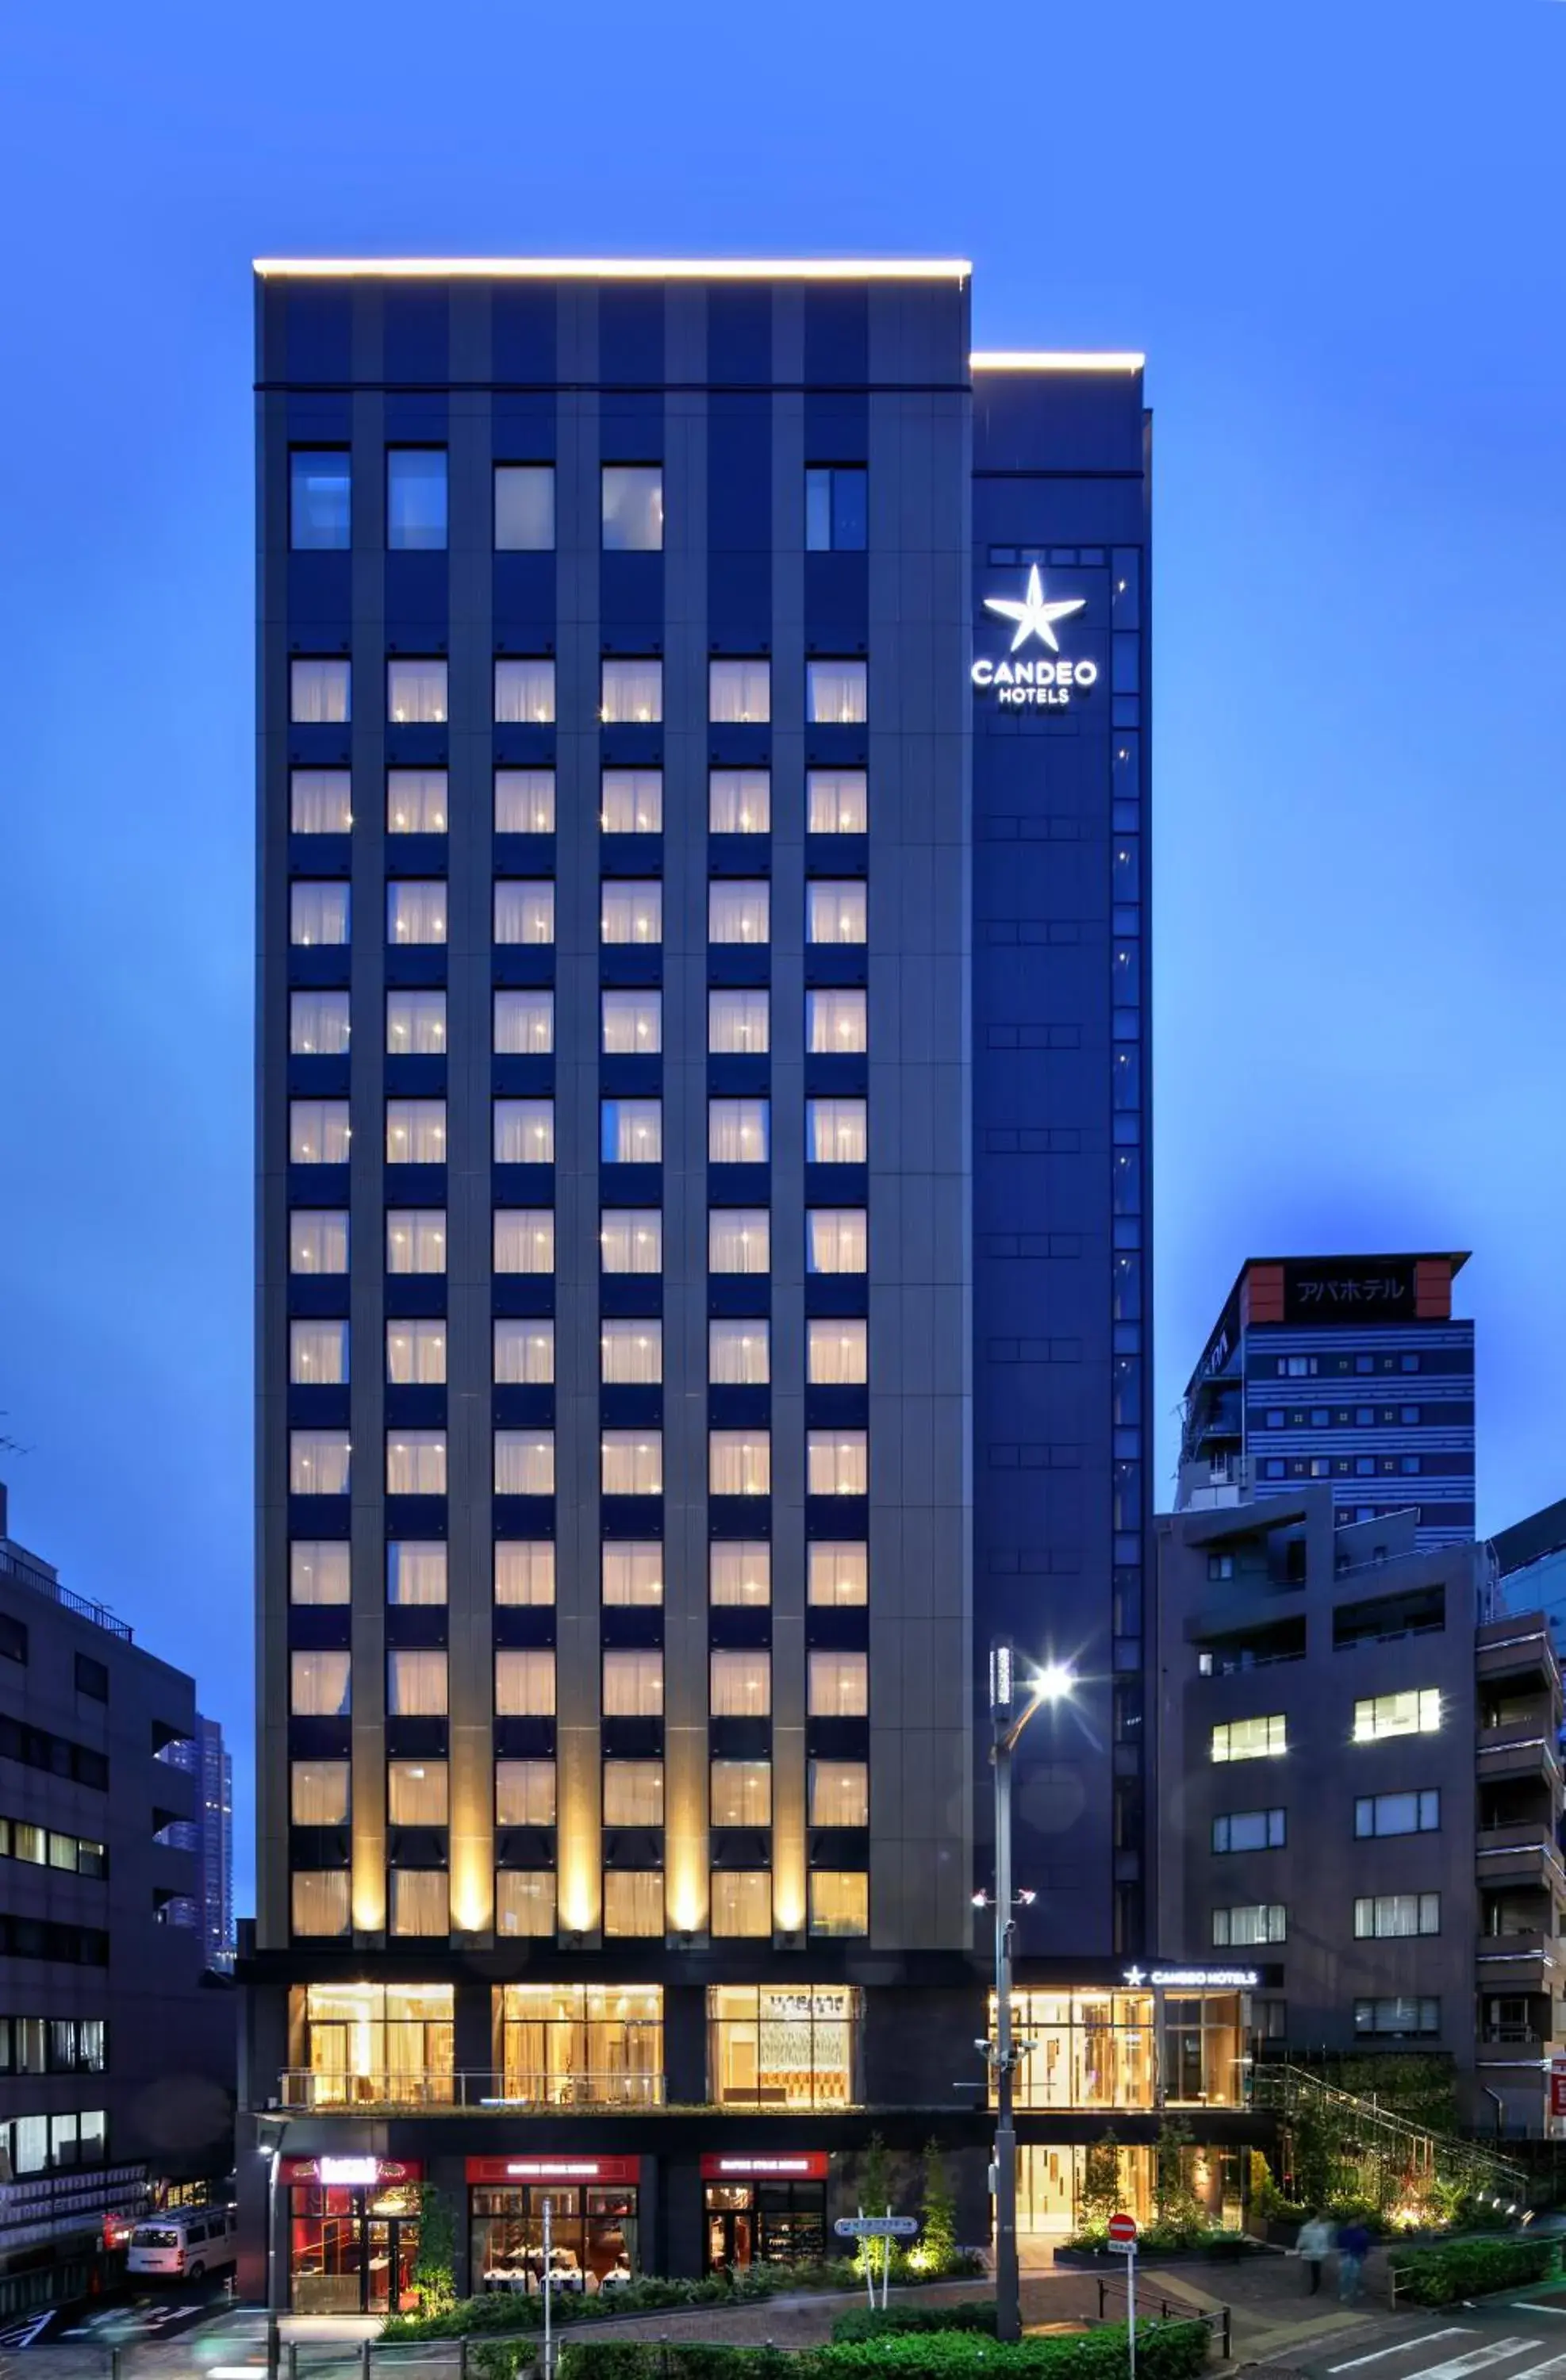 Bird's eye view, Property Building in Candeo Hotels Tokyo Roppongi